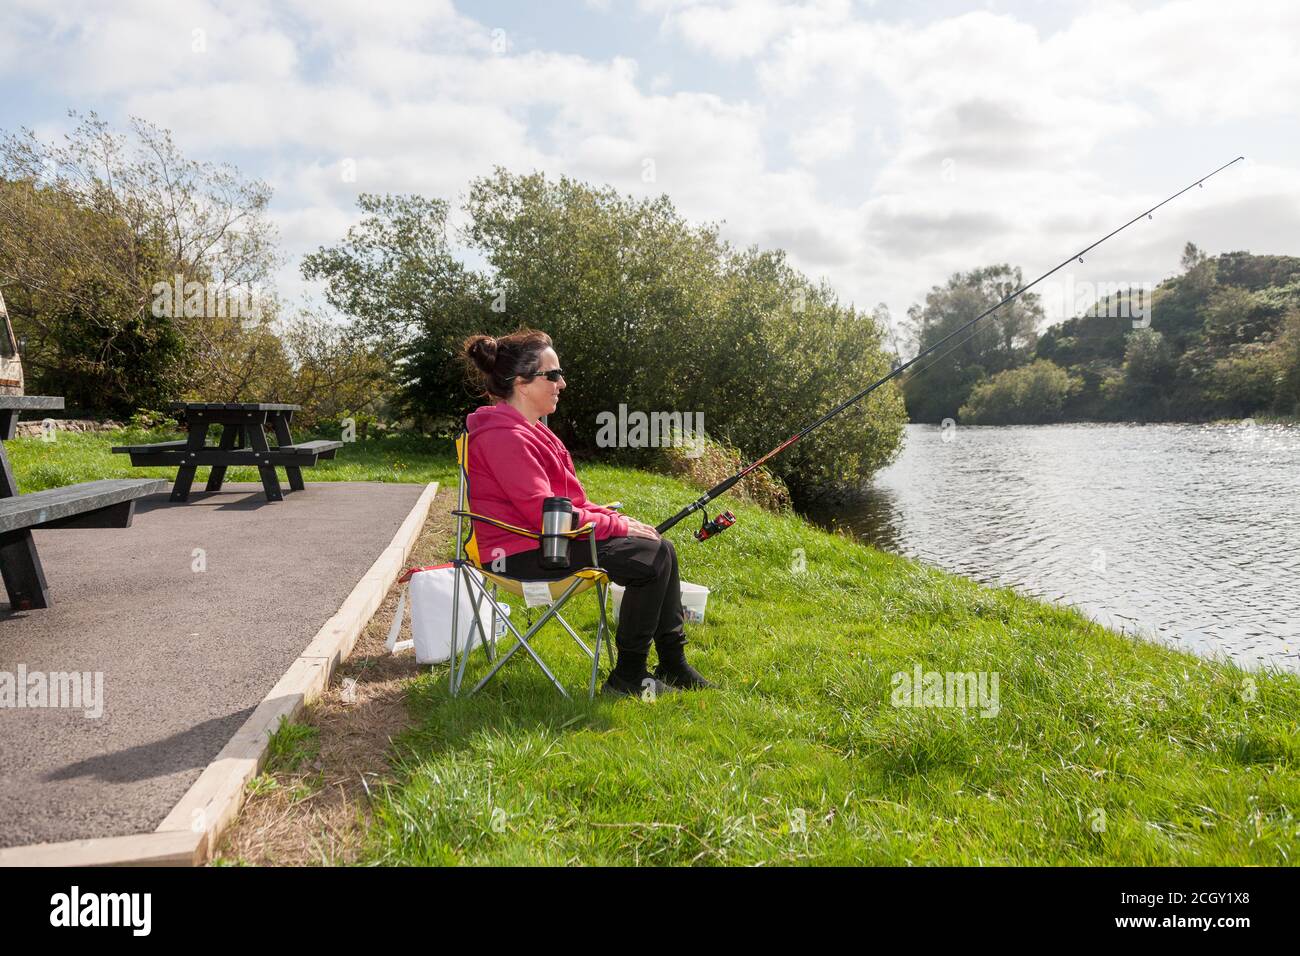 Inchigeelagh, Cork, Ireland. 12th September, 2020. Clare O' Connor from Coachford spending a relaxing afternoon course fishing on Lough Aulla outside Inchigeelagh, Co. Cork, Ireland. - Credit; David Creedon / Alamy Live News Stock Photo